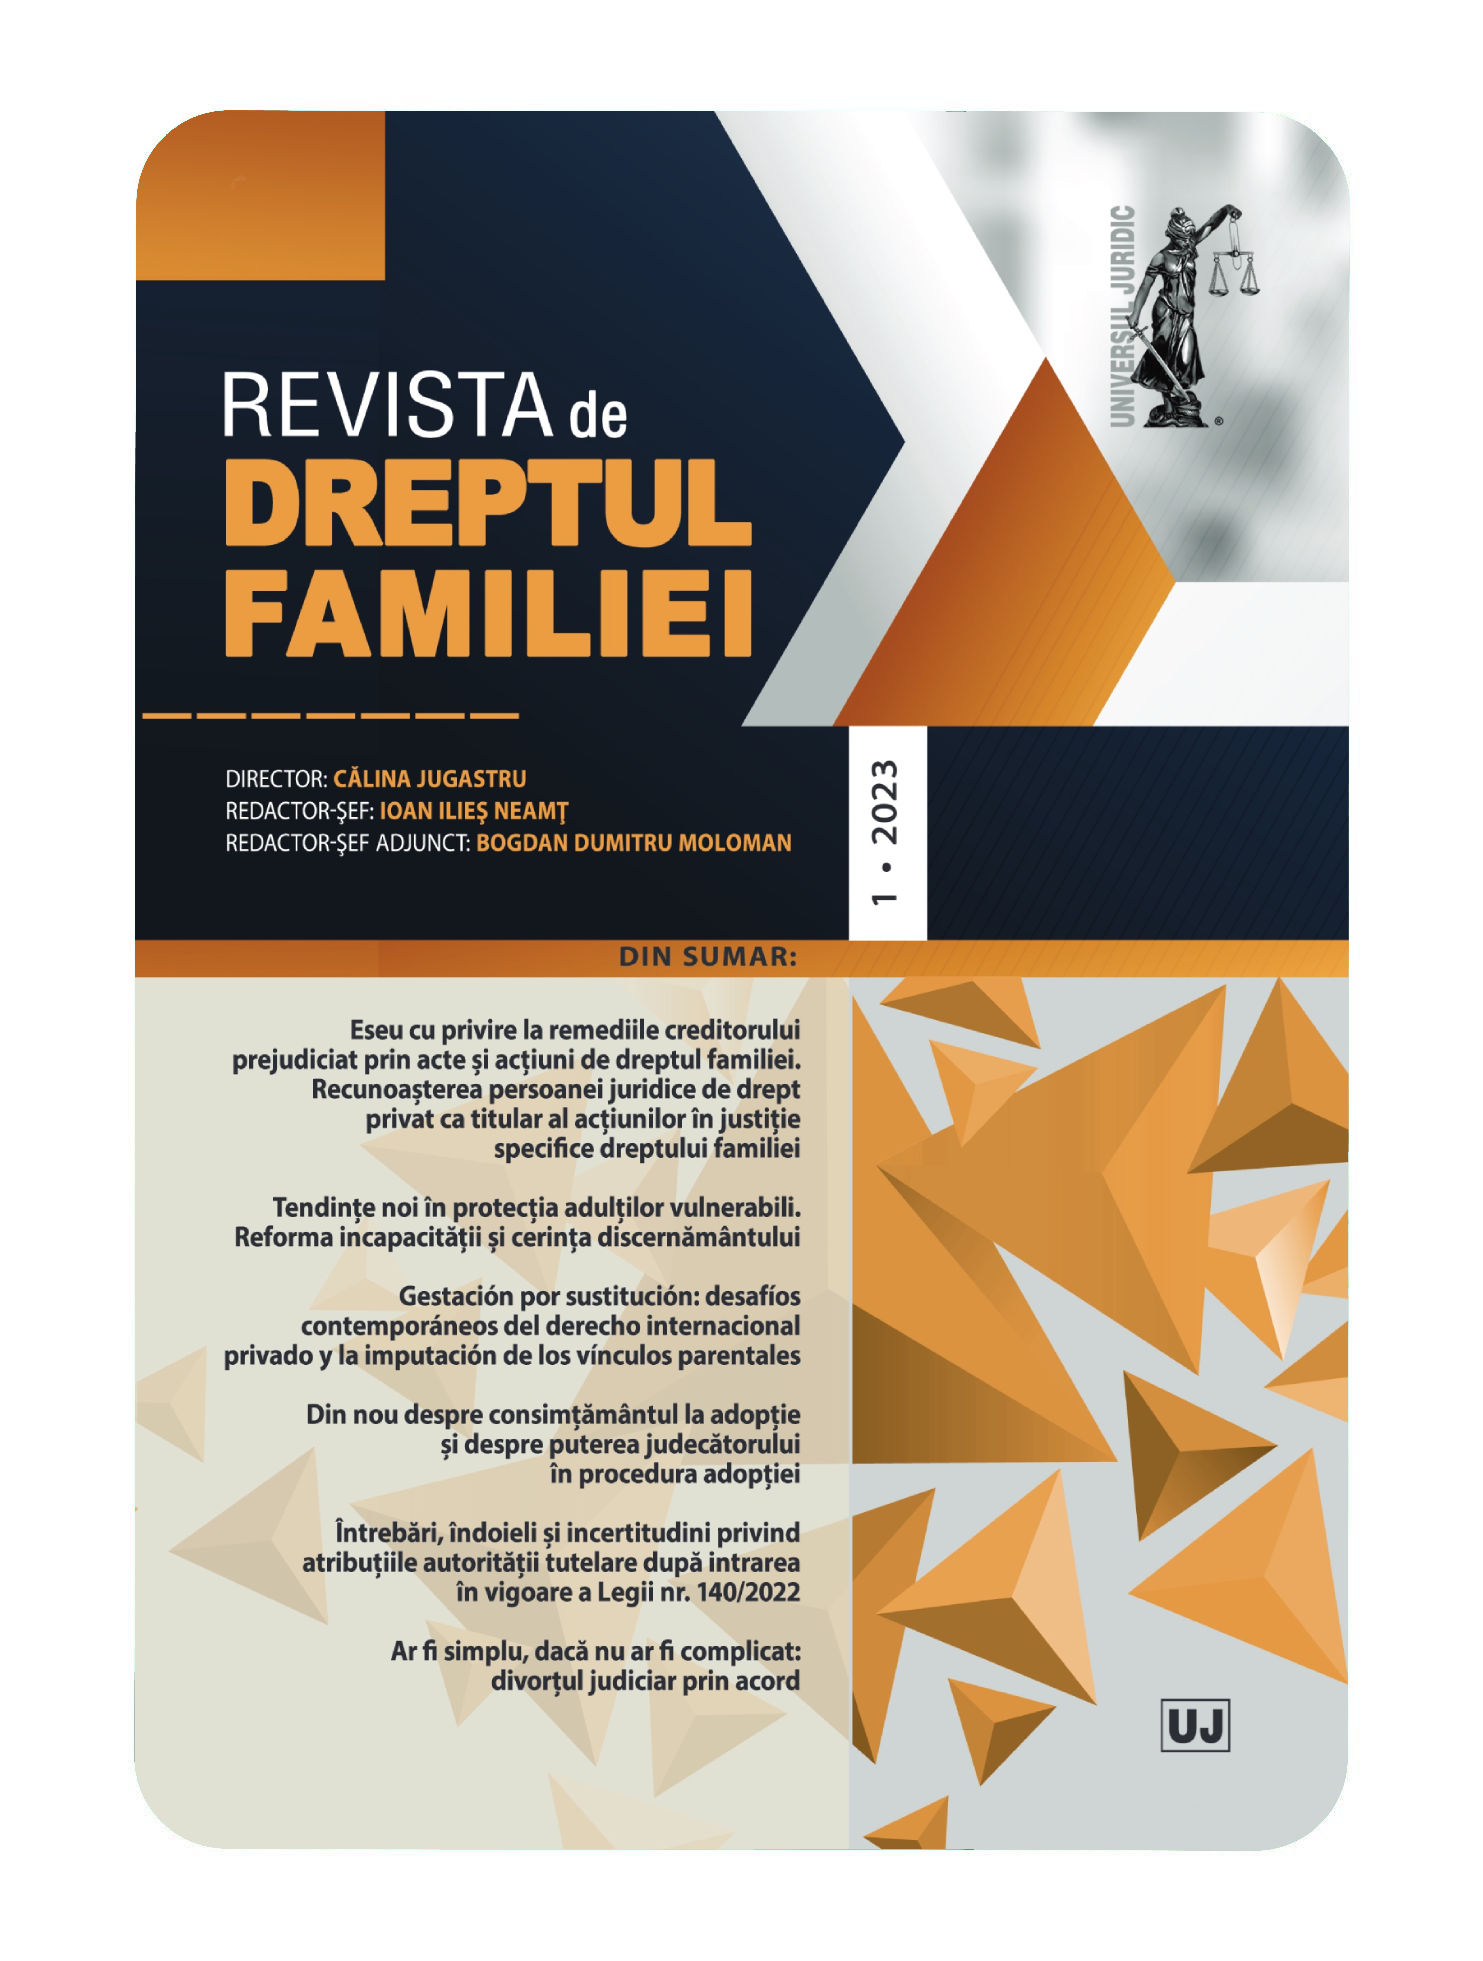 Marieta Avram, Civil Law. The Family, 3rd edition, revised and added, Hamangiu Publishing House, Bucharest, Romania, 2022, 840 pag. Cover Image